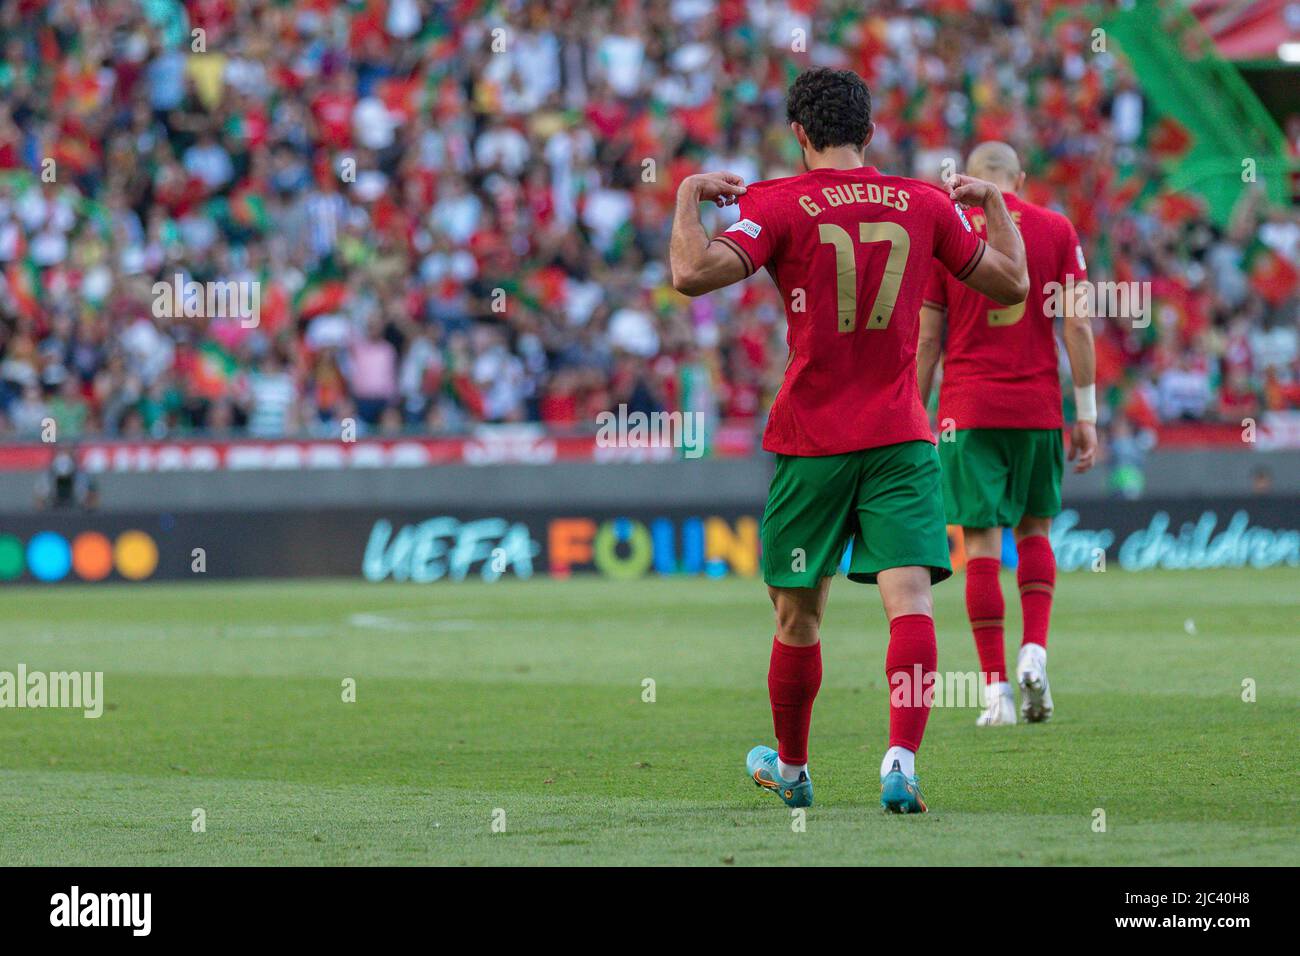 June 09, 2022. Lisbon, Portugal. Portugal's and Valencia midfielder Goncalo Guedes (17) celebrating after scoring a goal during the UEFA Nations League Final Tournament between Portugal and Czechia Credit: Alexandre de Sousa/Alamy Live News Stock Photo